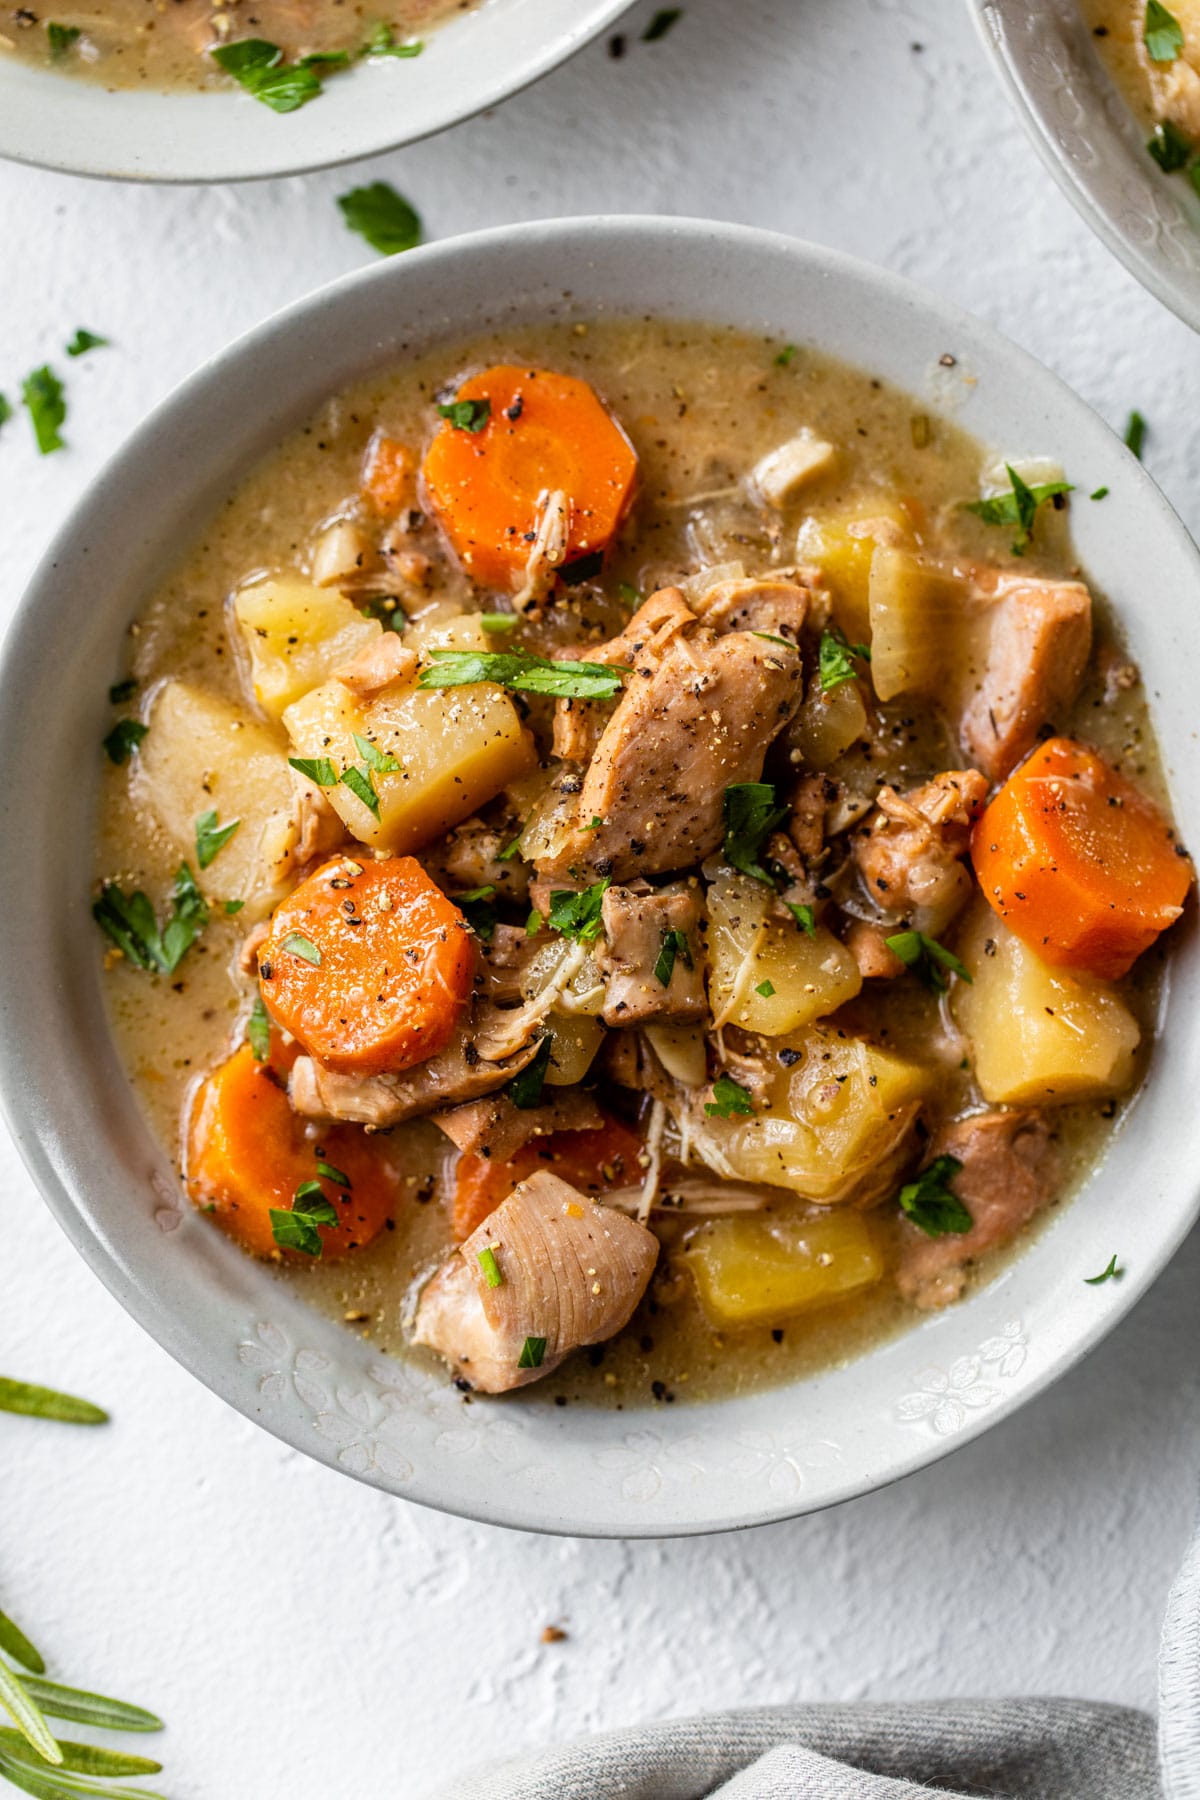 Delicious And Nutritious Crockpot Chicken Vegetable Stew